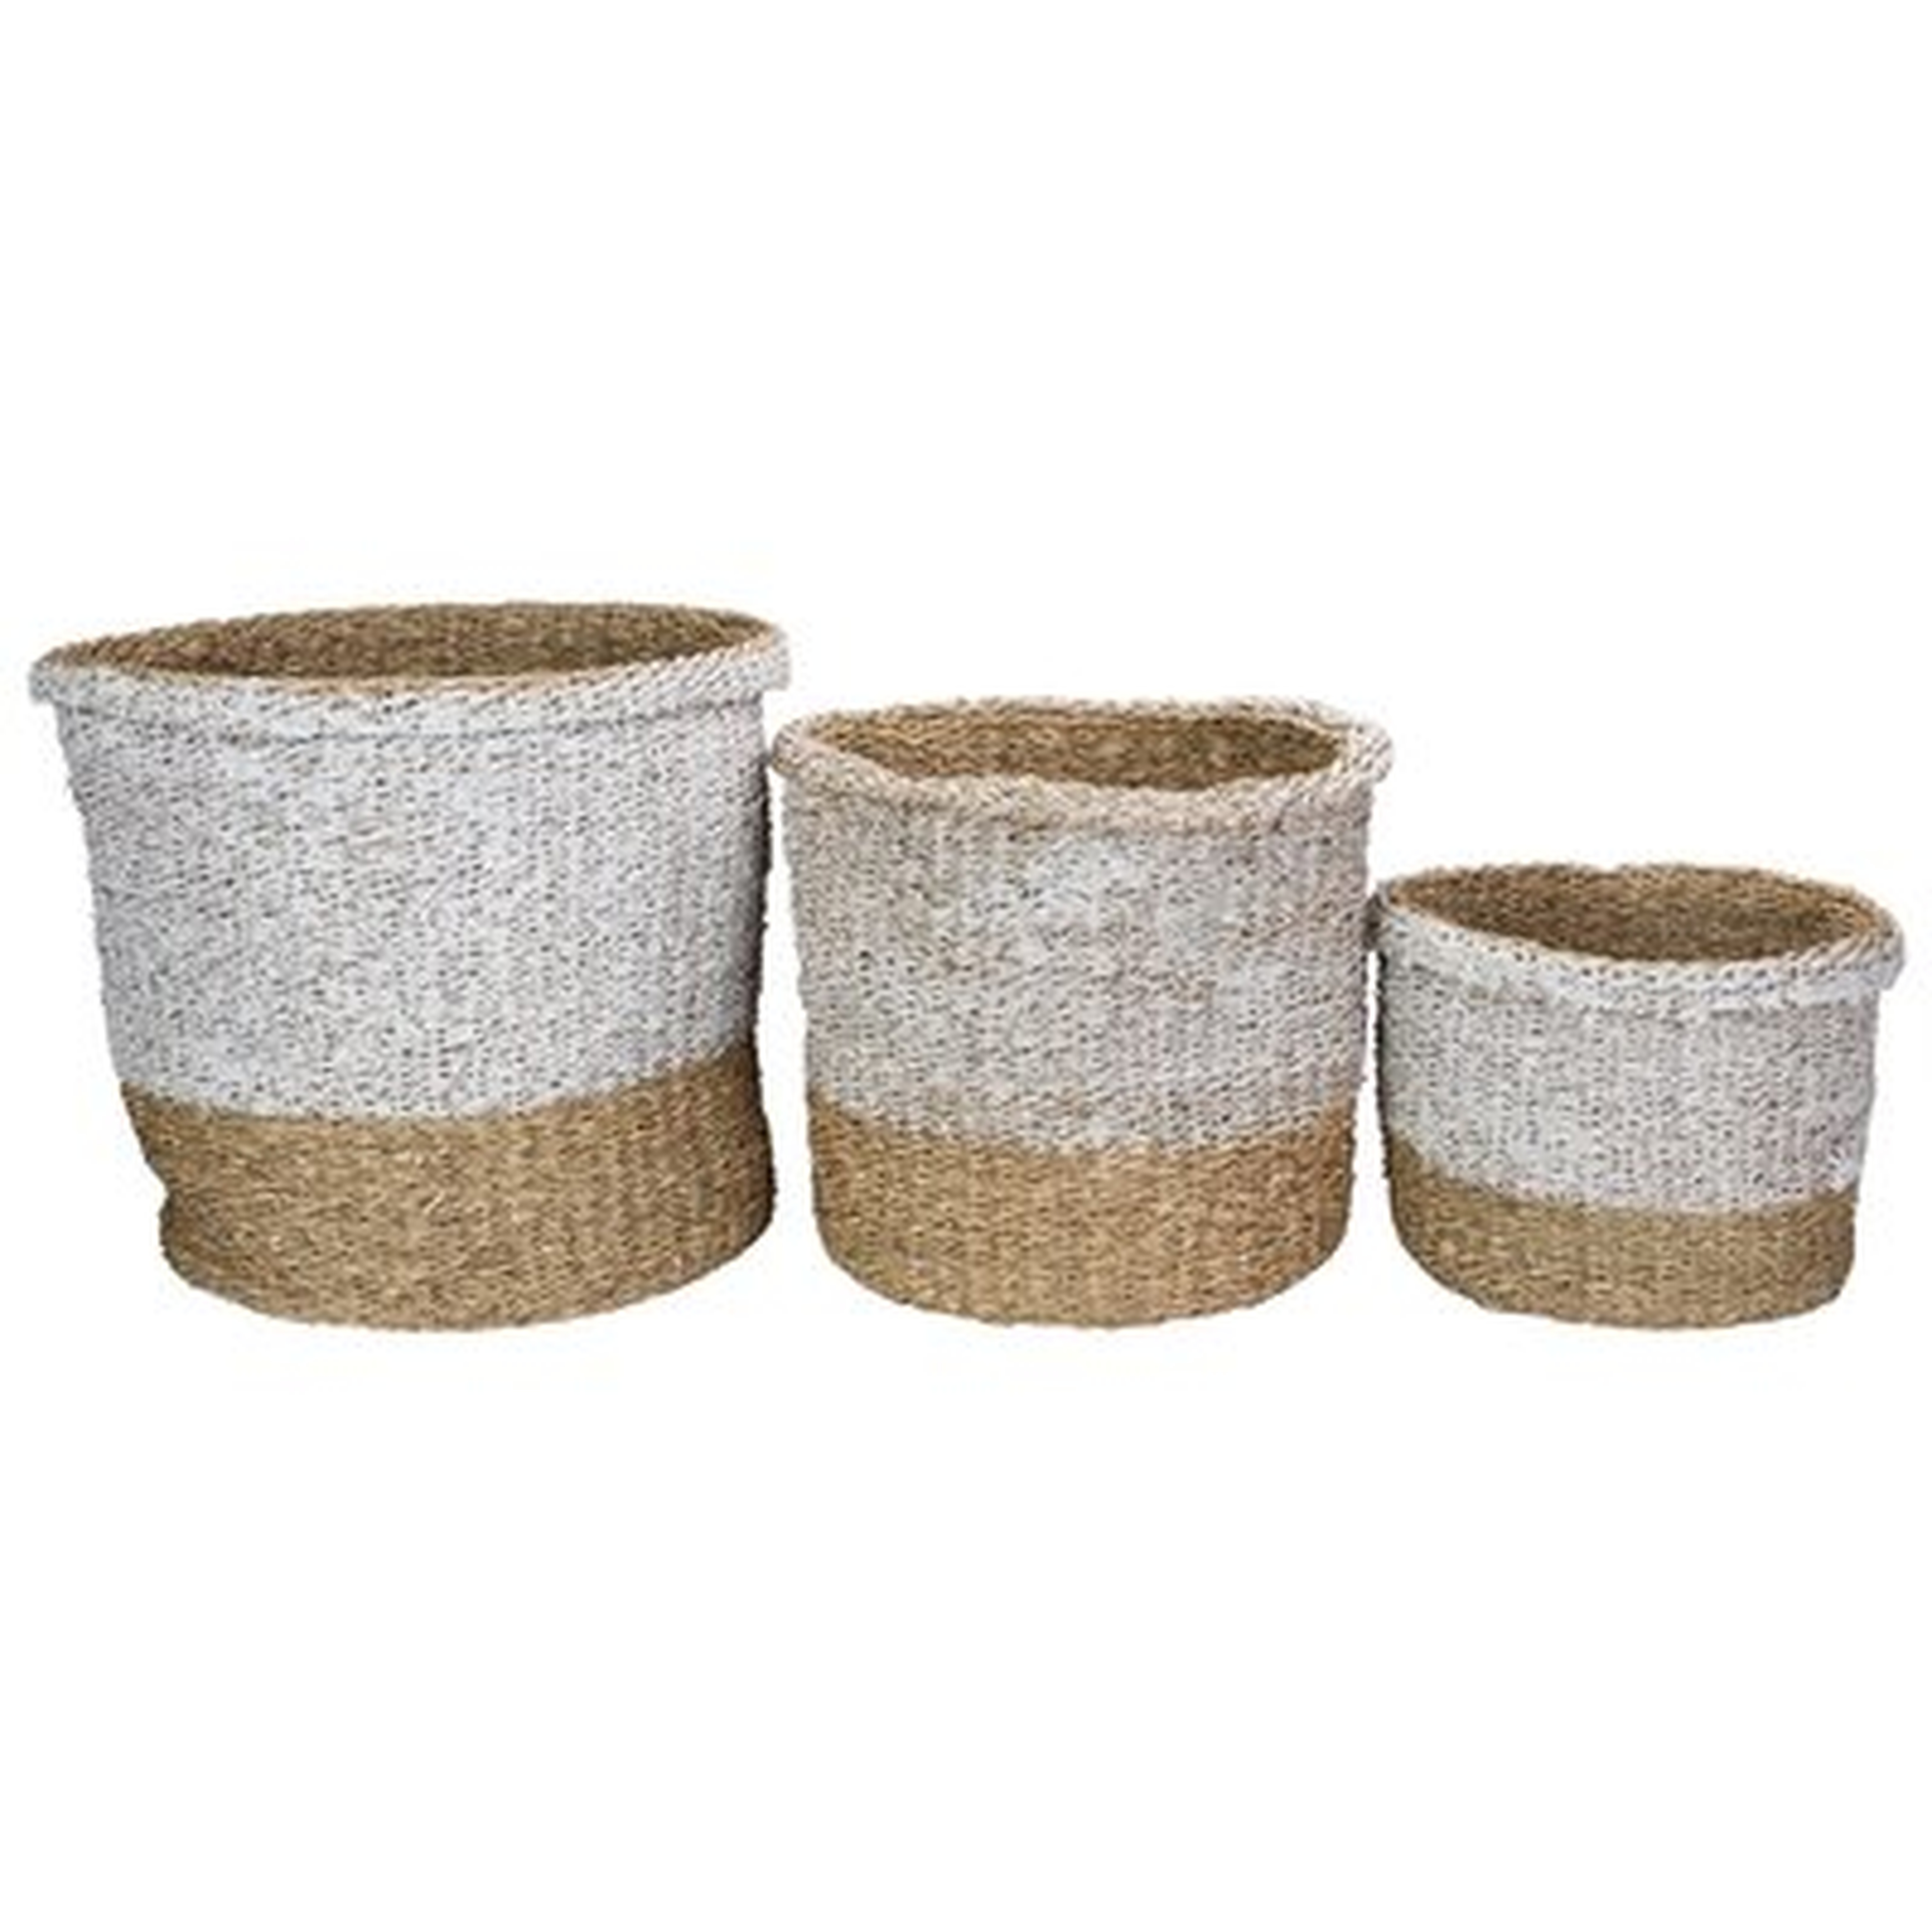 Set Of 3 Beige And White Wicker Table And Floor Baskets - Wayfair